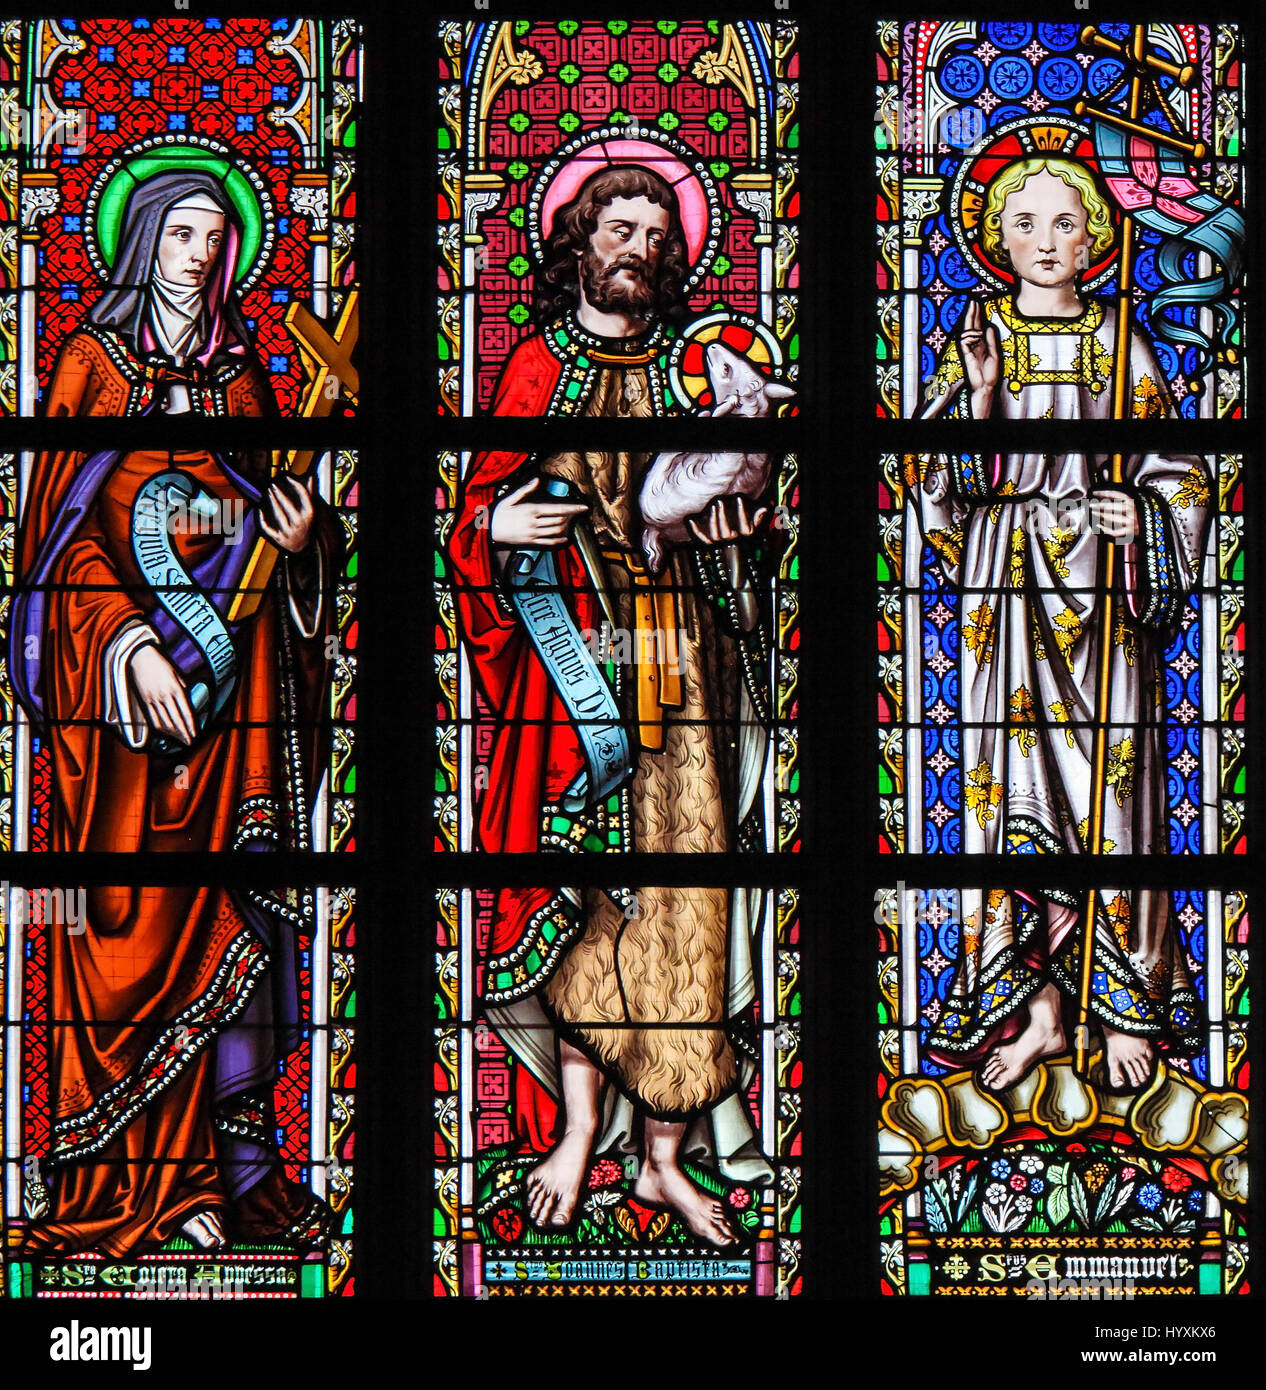 Stained Glass in the Church of Our Blessed Lady of the Sablon in Brussels, Belgium, depicting Saints Colette, John the Baptist and Emmanuel Stock Photo